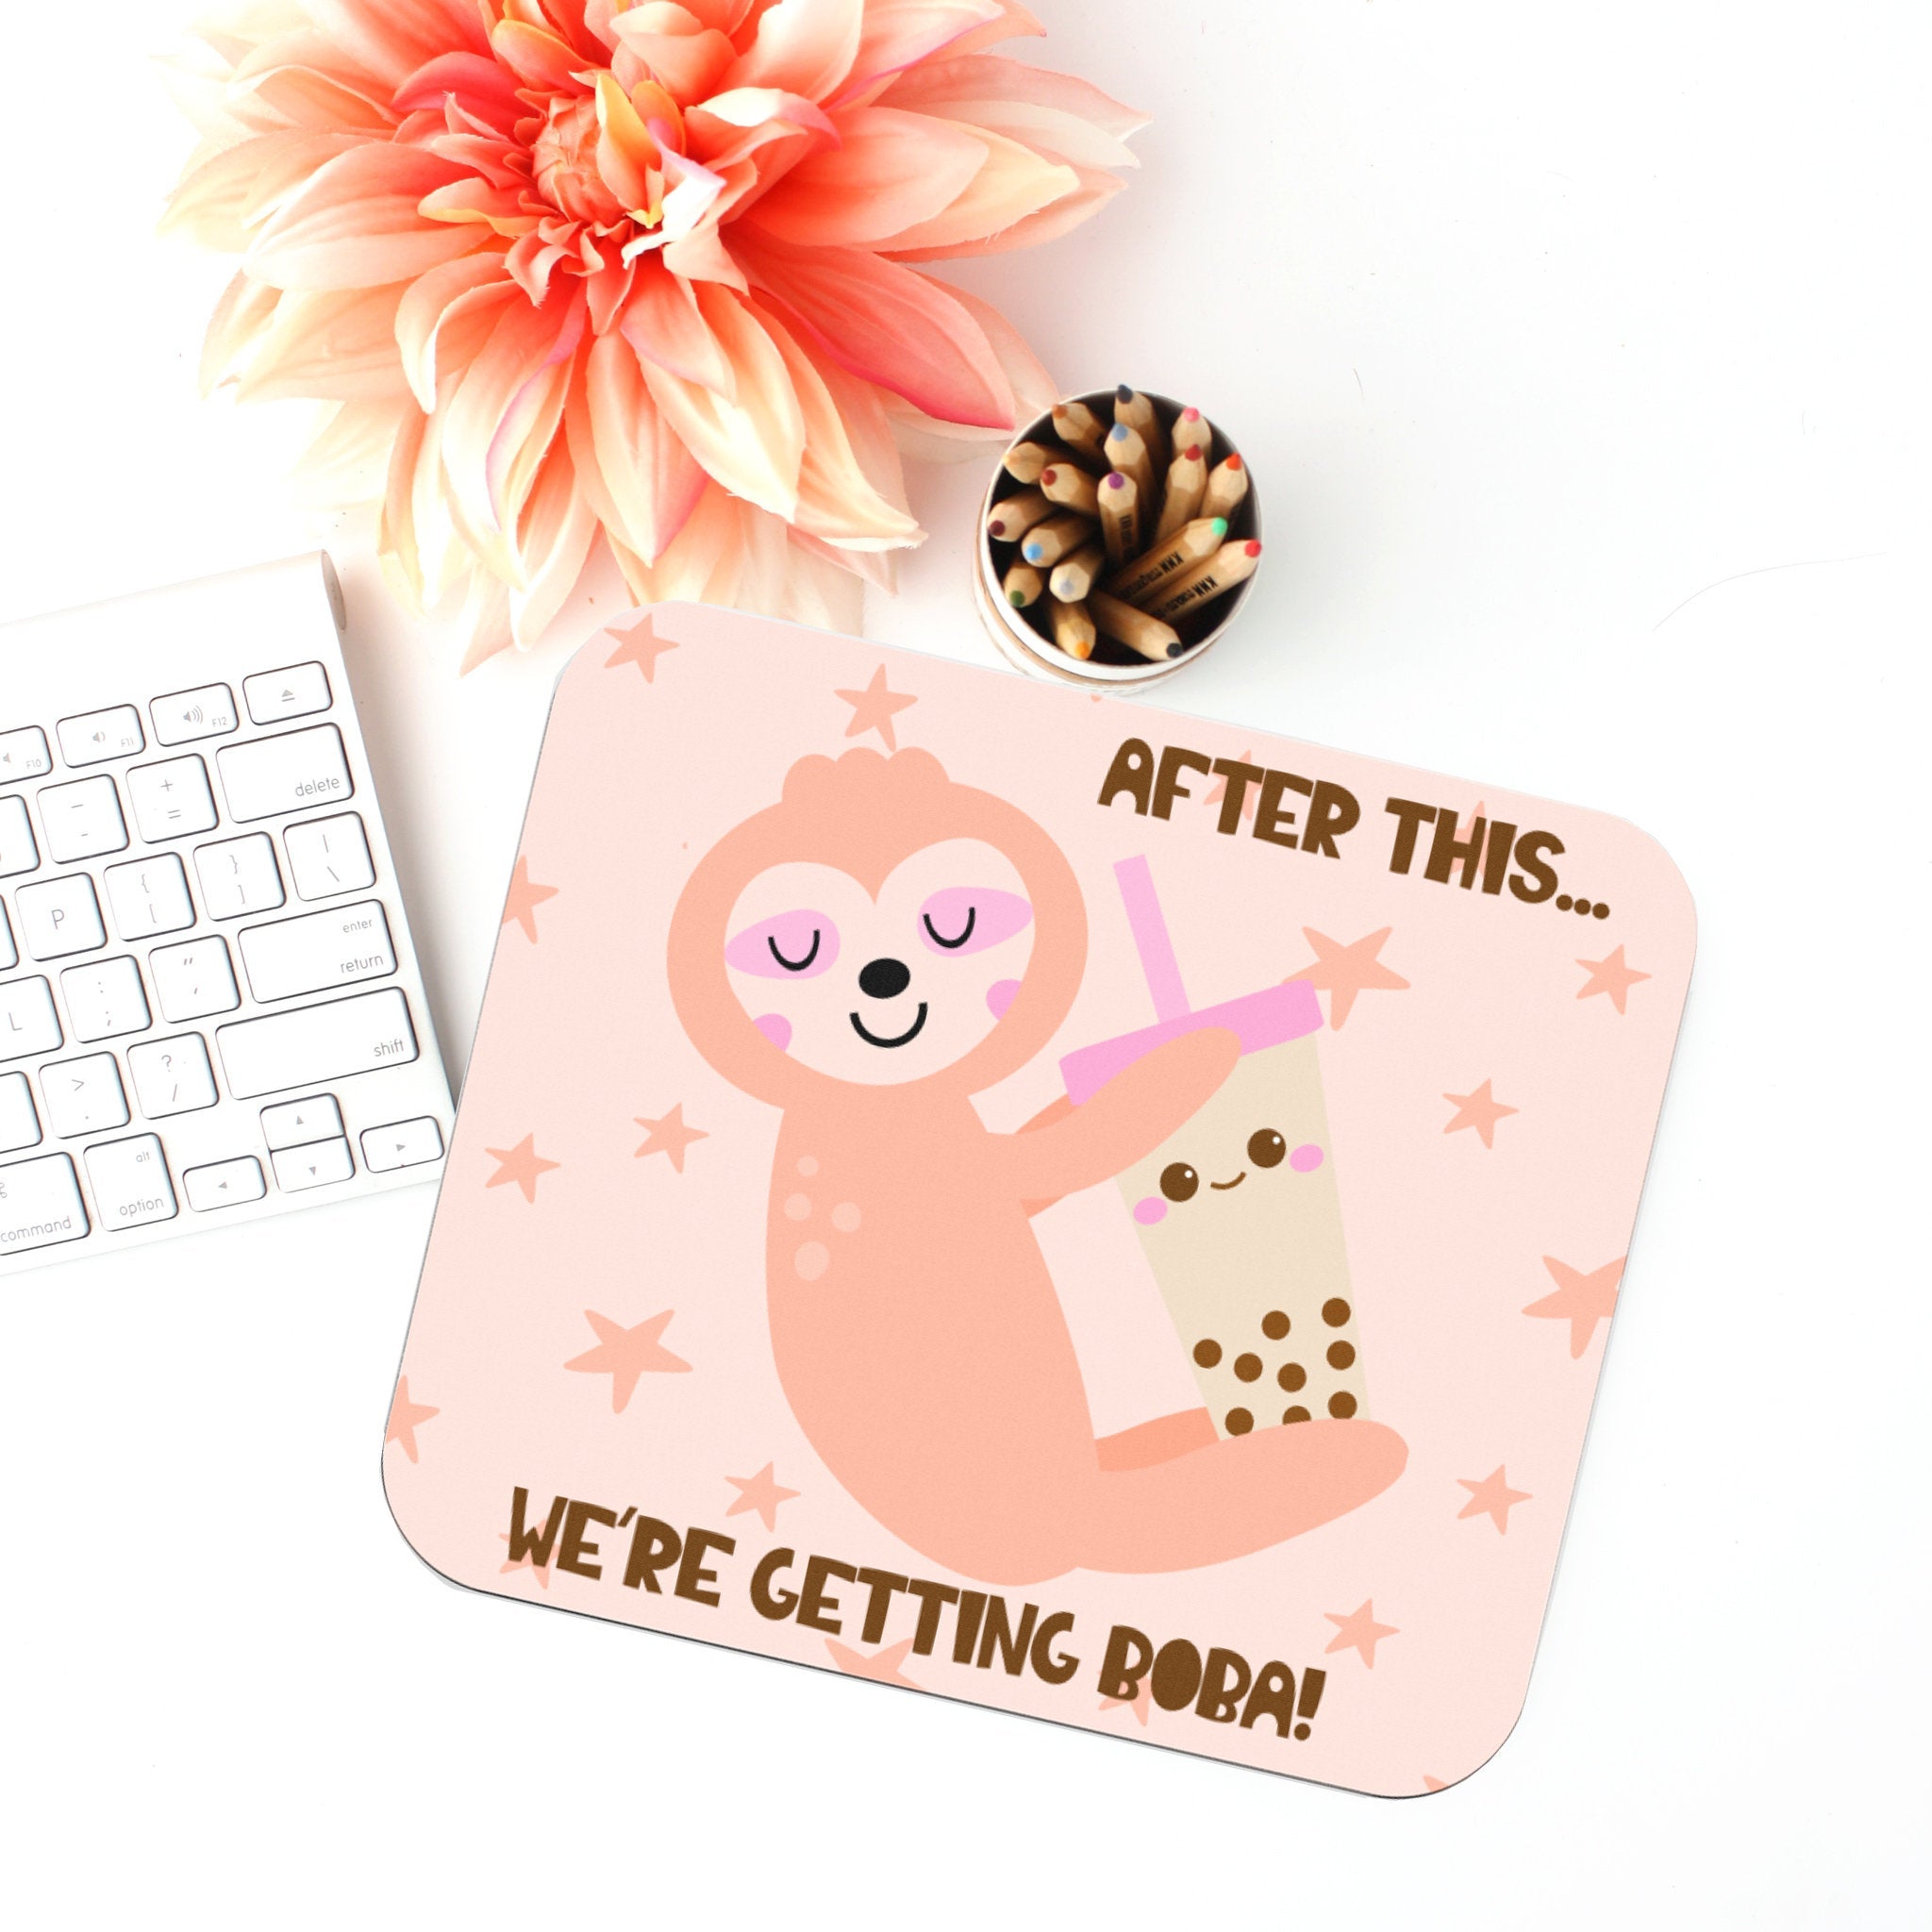 Sloth Boba Tea Print Mouse Pad, Desk Accessories, Office Decor for Women, Office Gifts, Co-worker Gift, Work From Home Gift, Bubble Tea Gift